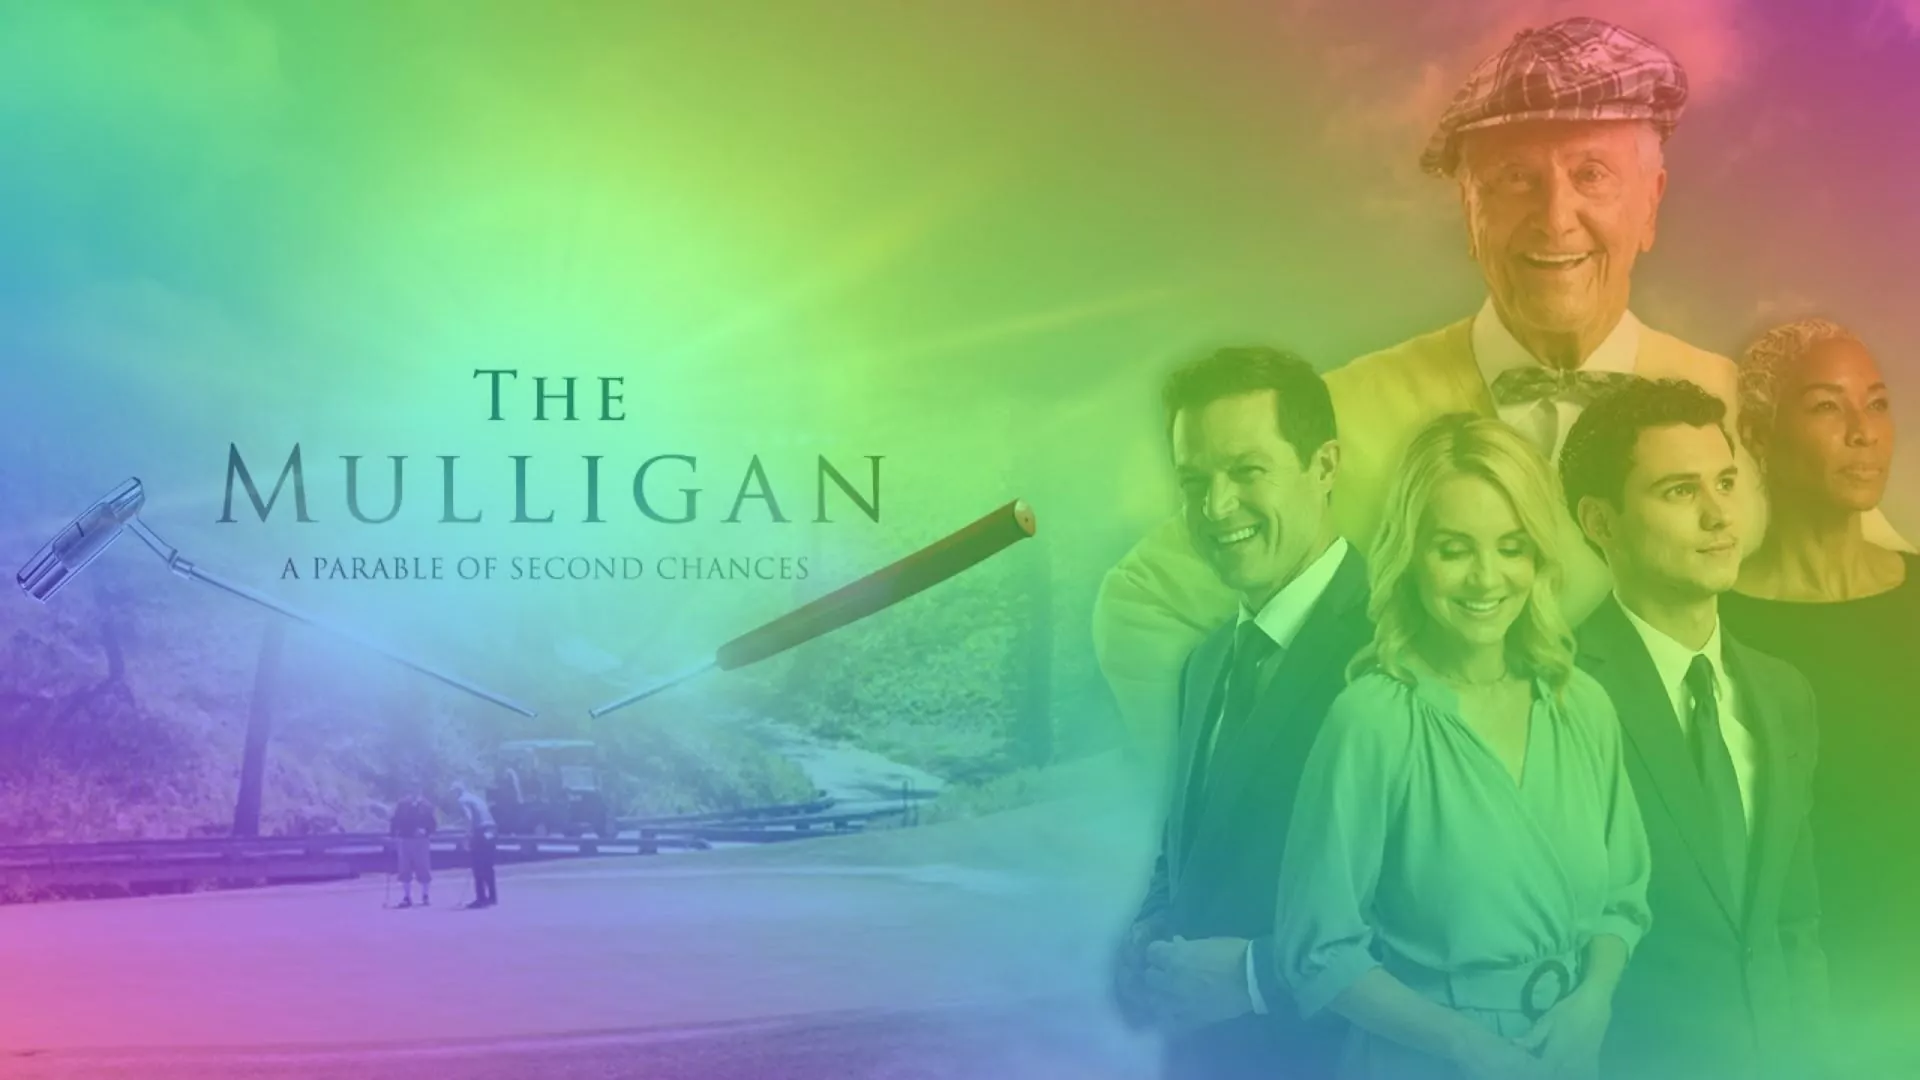 The Mulligan Parents Guide. The Mulligan Age Rating. The Mulligan release date, cast, production, synopsis, trailer and images.